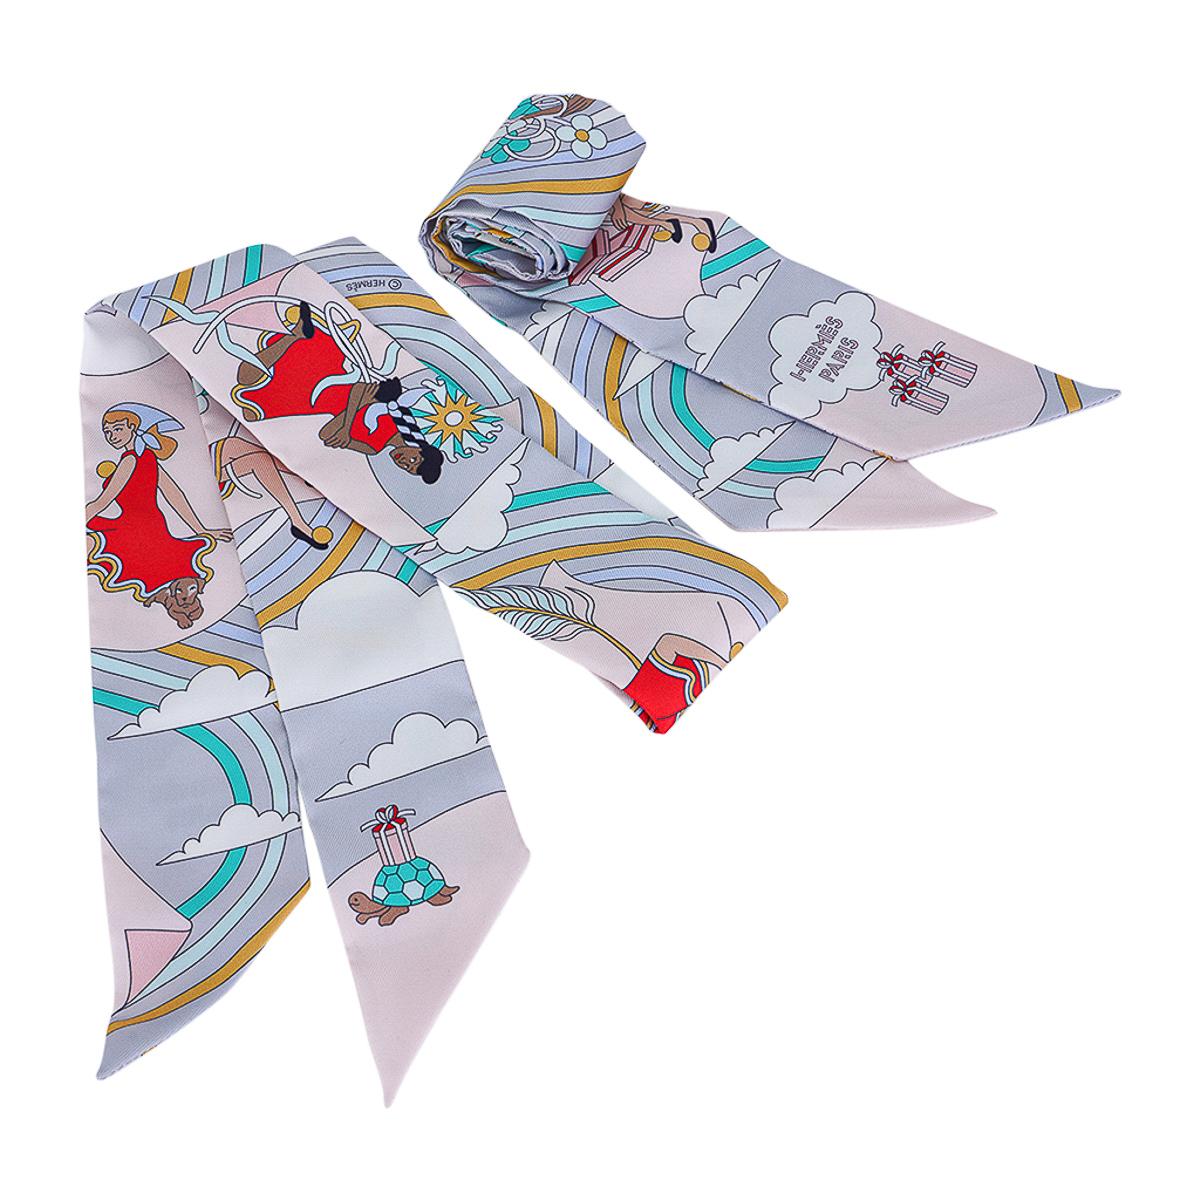 Hermes Twilly Carres Volants Gris Perle / Rose Pale Silk Scarf Set of 2 For Sale 2